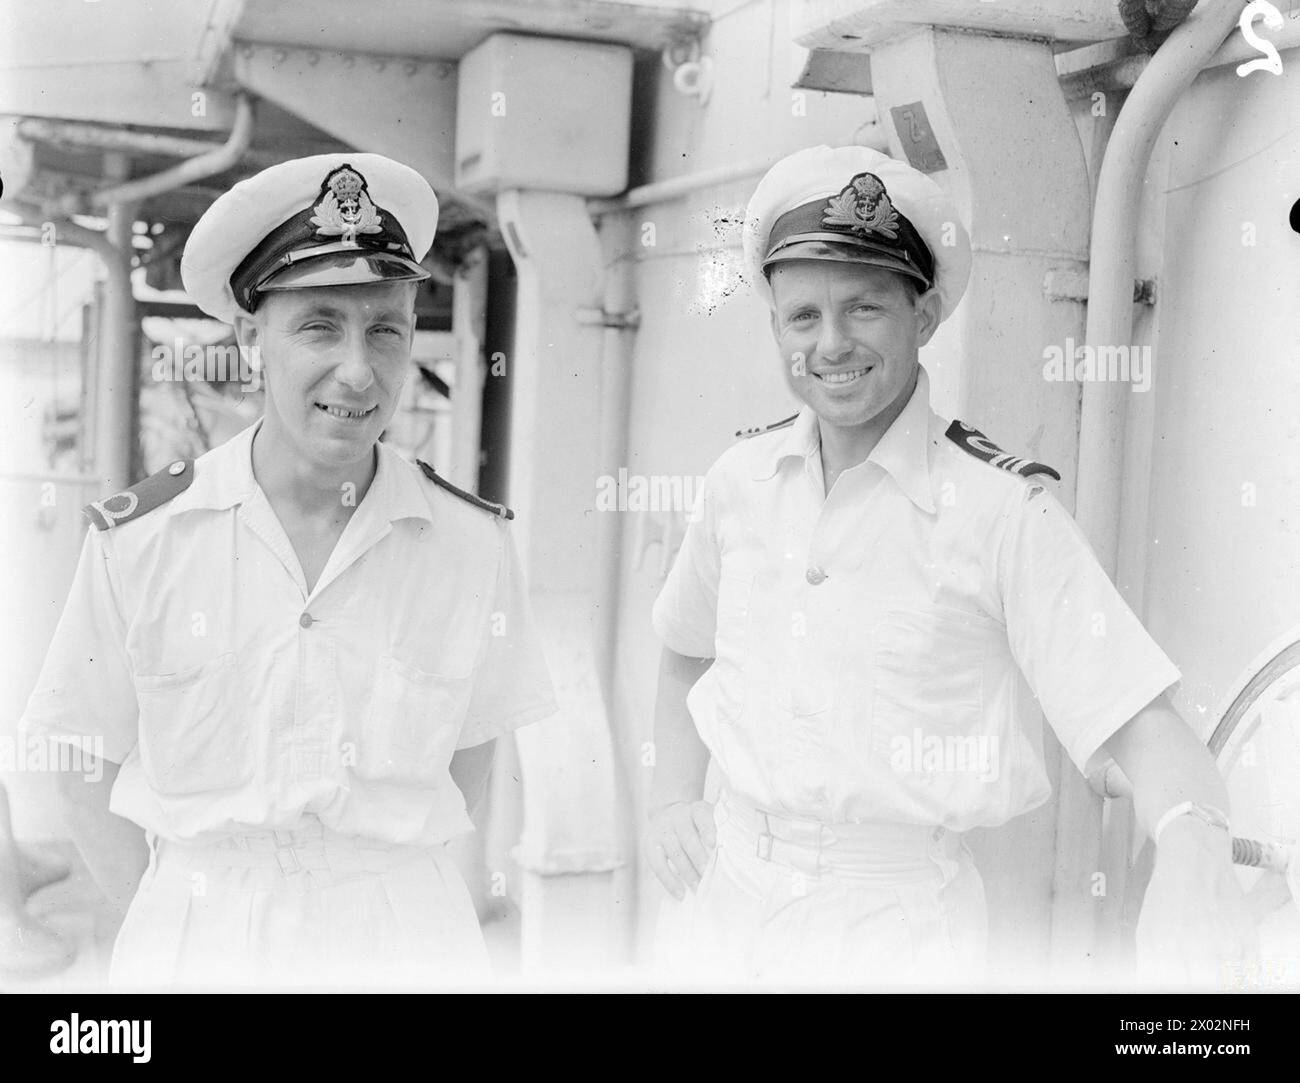 SHATTERED JAPANESE CONVOY. 4 APRIL 1945, TRINCOMALEE, ON BOARD THE DESTROYER HMS SAUMAREZ. OFFICERS AND MEN OF HMS SAUMAREZ, PART OF THE EAST INDIES FLEET WHICH SHATTERED A JAPANESE CONVOY AND ESCORTS IN THE ANDAMAN SEA IN MARCH 1945. - Gunner (T) Mr E W M Peters, DSM, RN, of Pitsea, Essex, with the First Lieutenant, Lieut Cdr J Lennox-King, RNZNVR, of Auckland, NZ Stock Photo